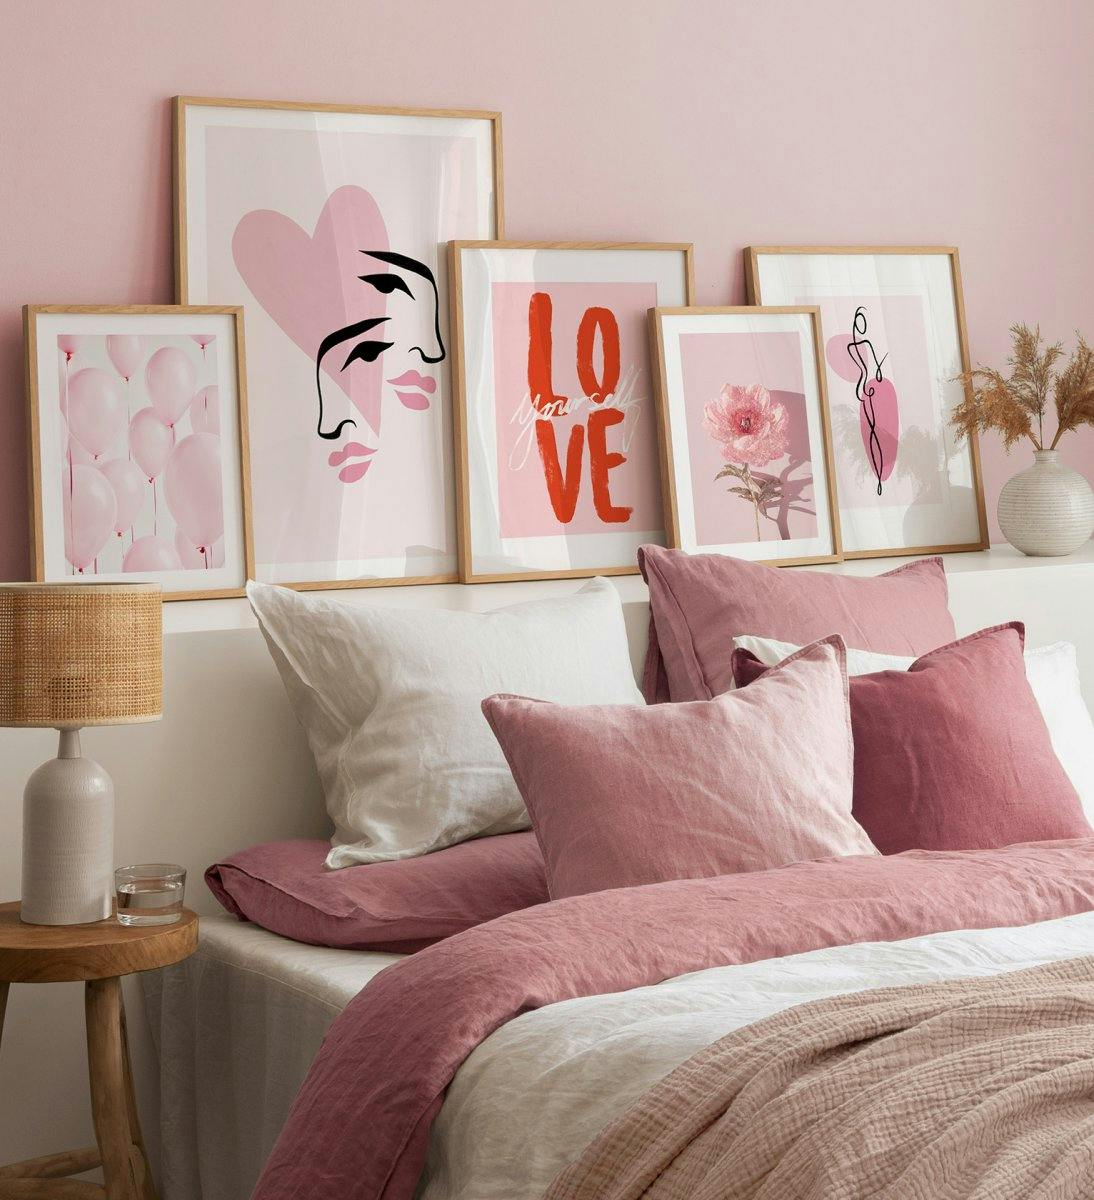 Gallery wall in pink with illustrations and photographs of flowers, line shapes and quotes with oak frames for bedroom